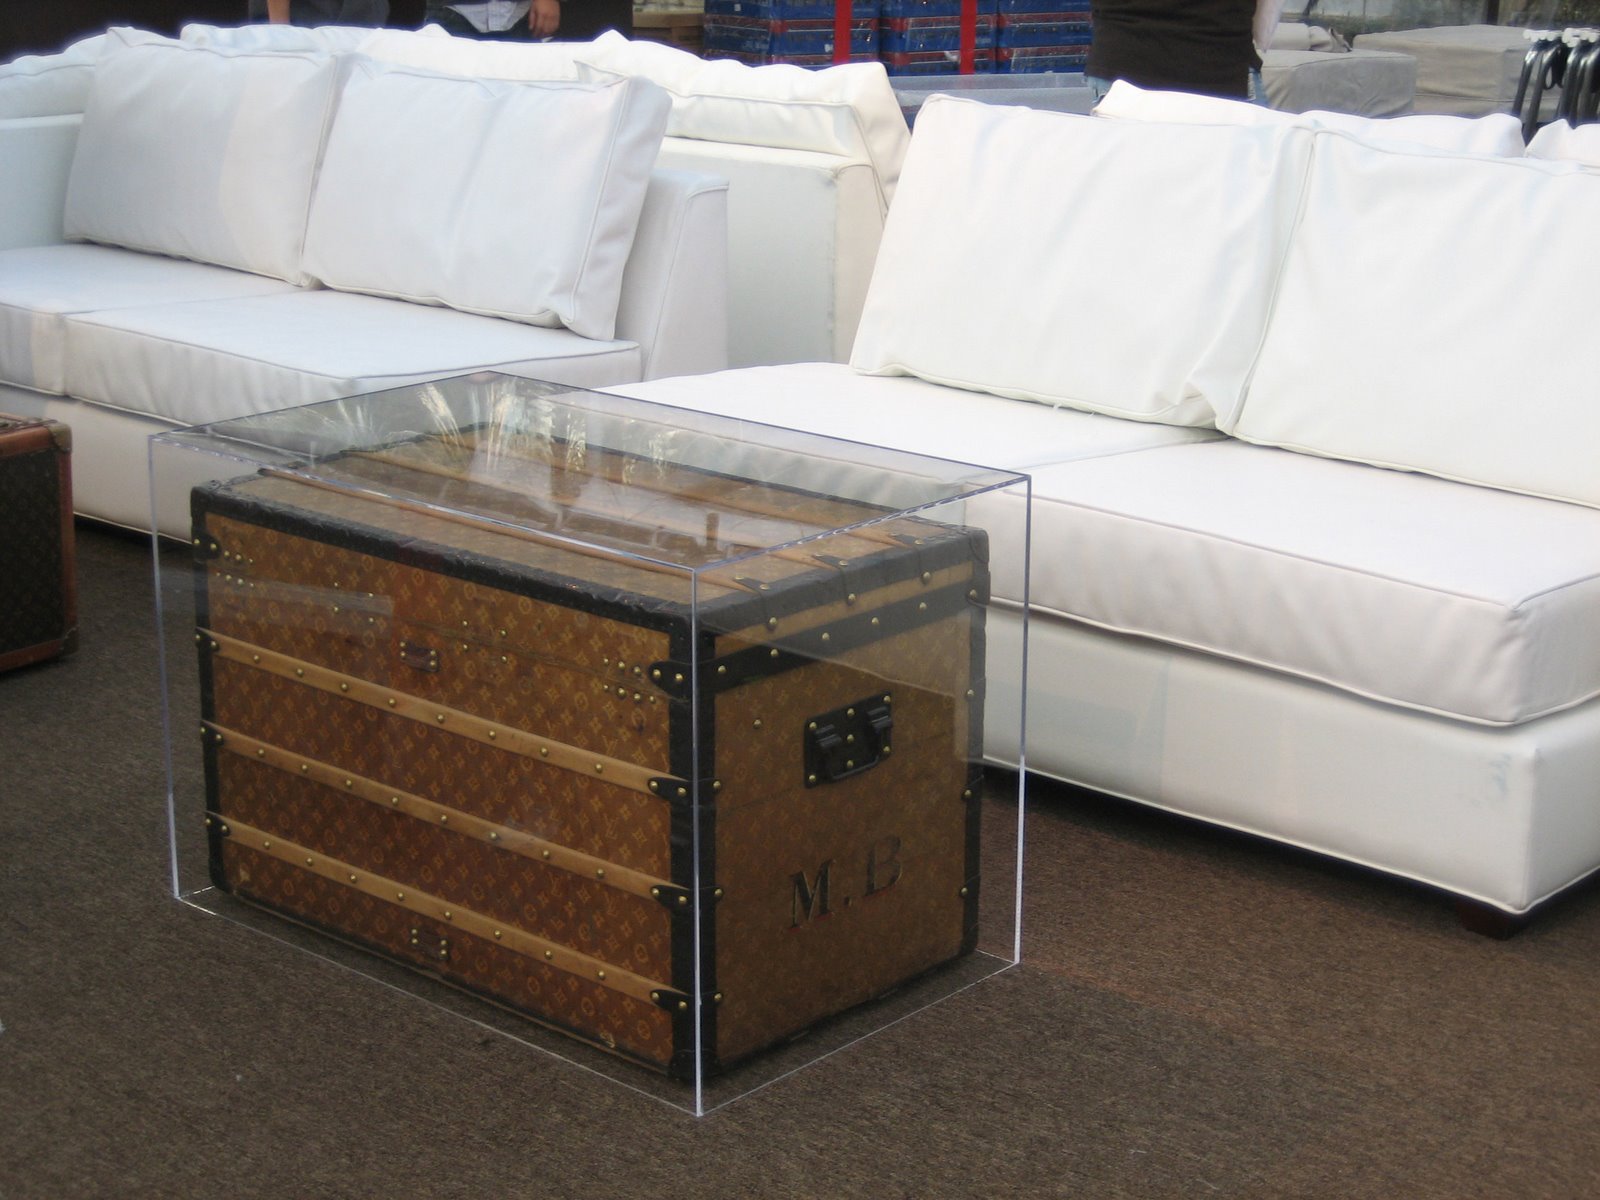 Aaron R Thomas turns your Louis Vuitton Luggage into a Coffee Table with  Custom Acrylic / Lucite cases